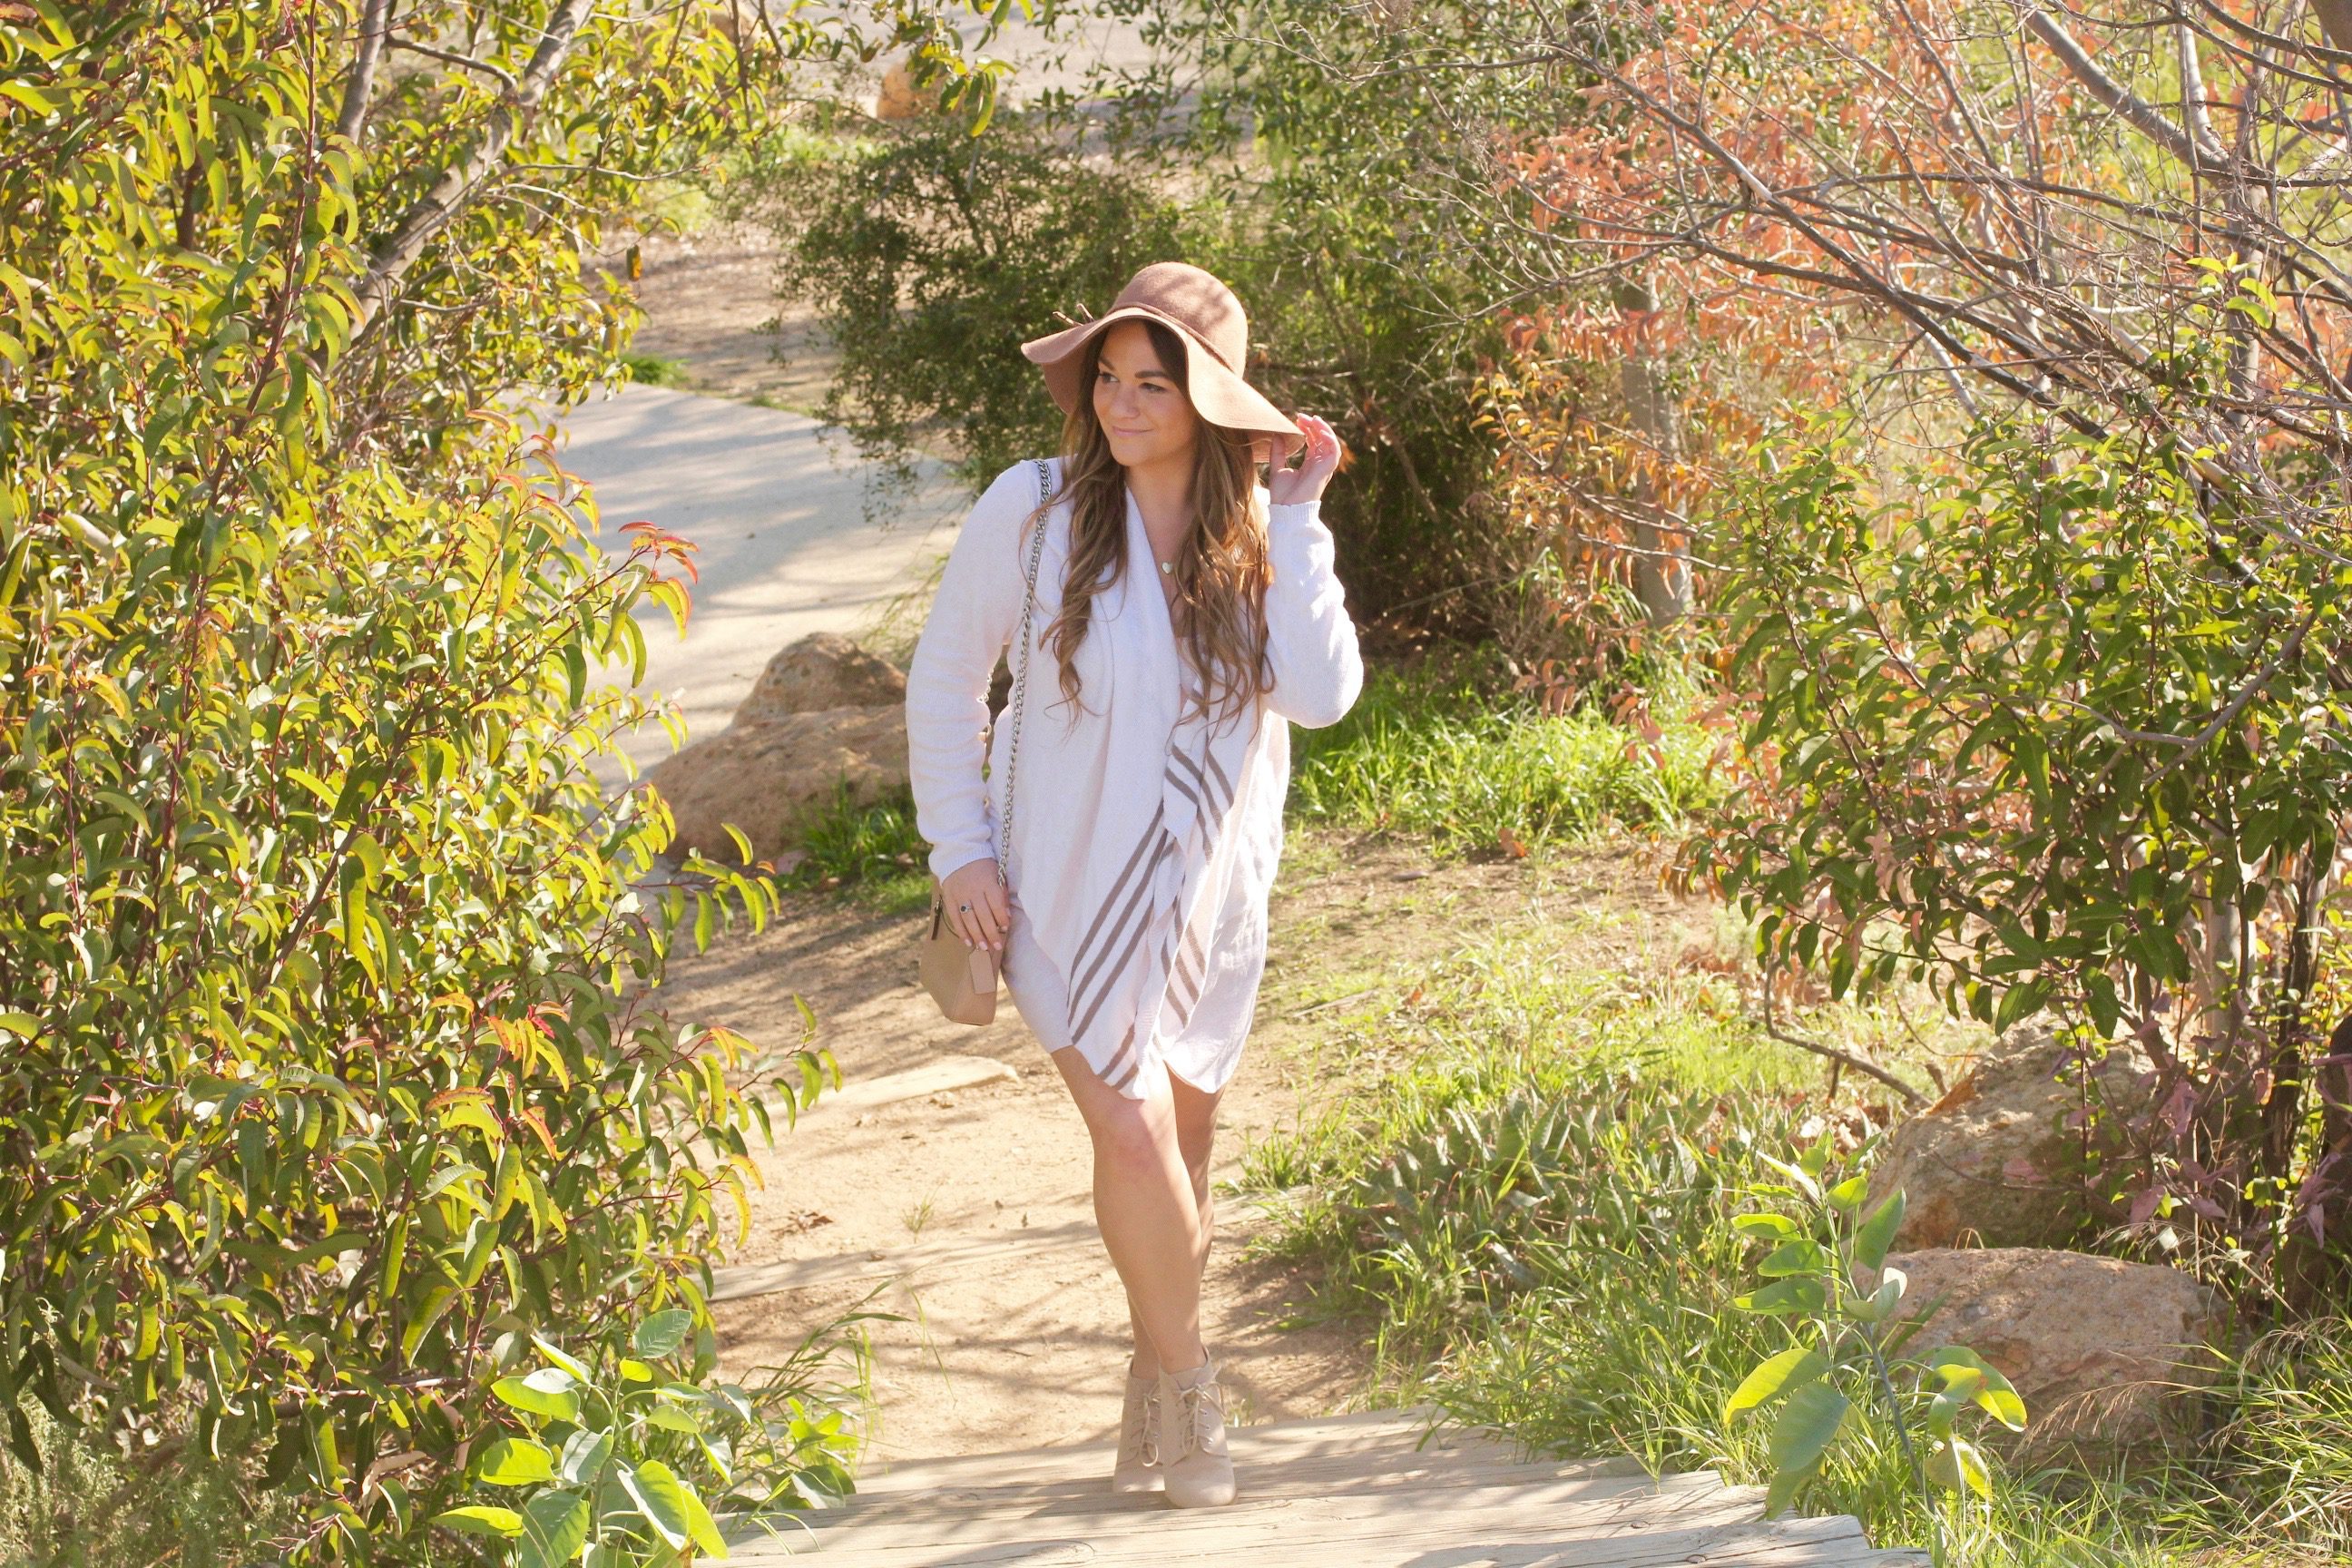 missyonmadison, melissa tierney, spring style, spring fashion, spring trends, fashion blogger, la blogger, hollywood hills, tan floppy hat, target style, target floppy hat, old navy cardigan, beige open front cardigan, beige suede lace up ankle boots, beige suede booties, beige leather crossbody bag, coach crossbody bag, beige chain crossbody bag, threads for thought dress, threads for thought penny dress, beige cardigan,